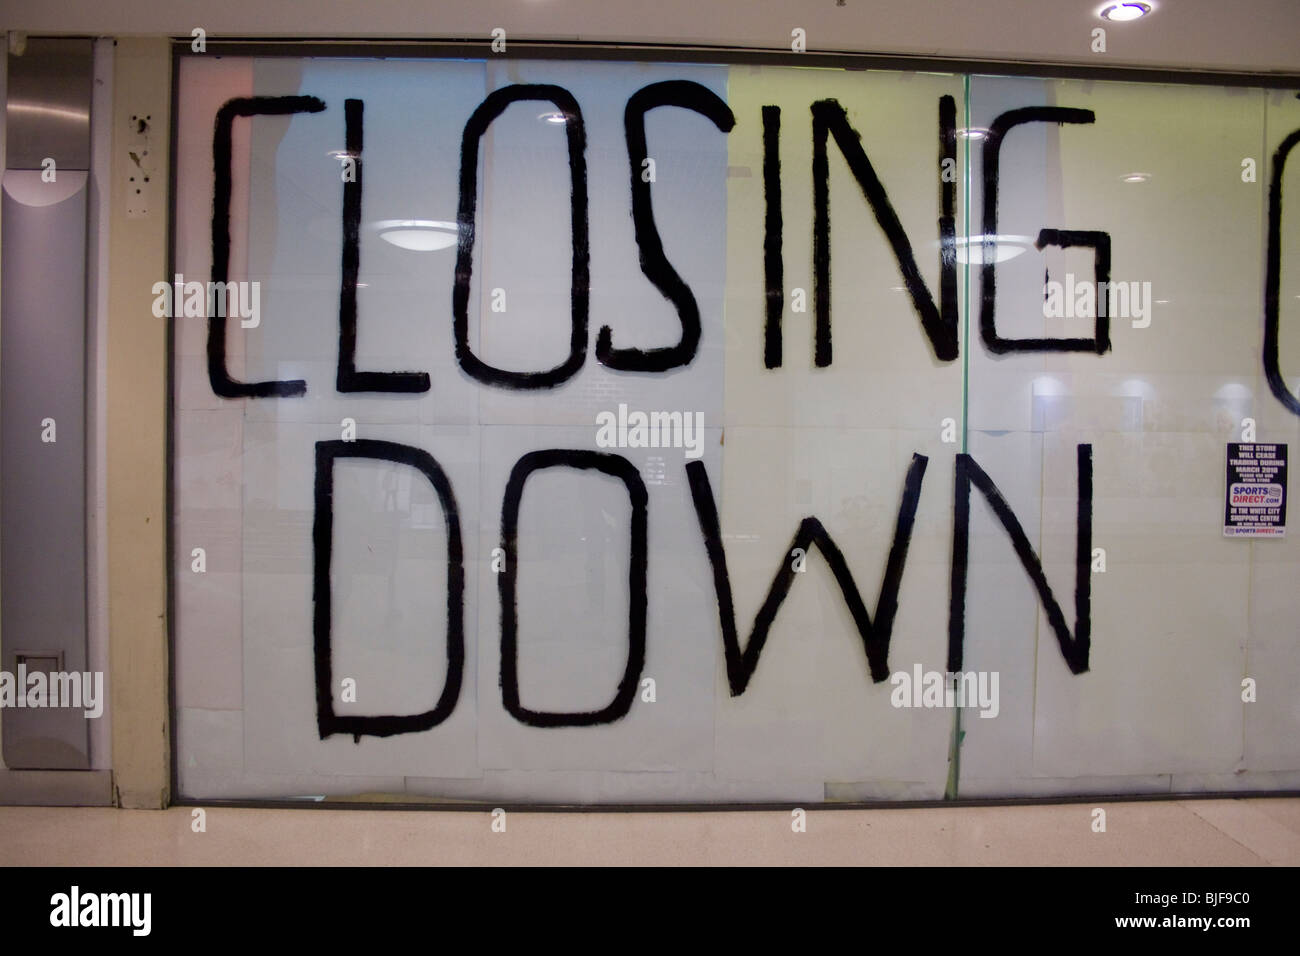 Closing Down written in big letters on a shop window Stock Photo